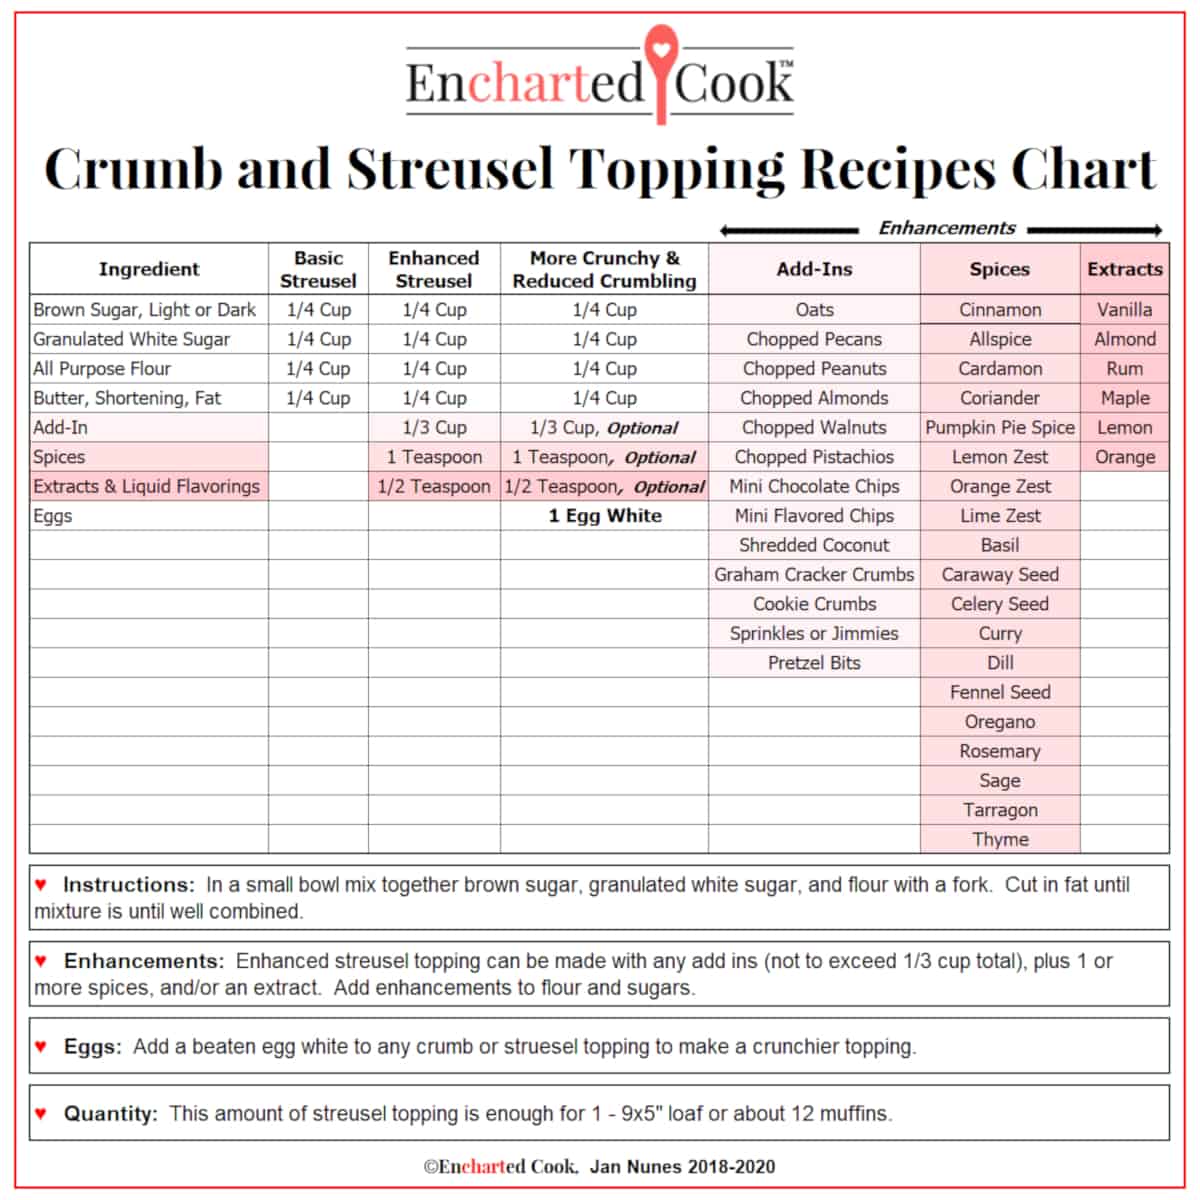 Chart showing the basic recipe for a crumb topping and ingredients to enhance it.